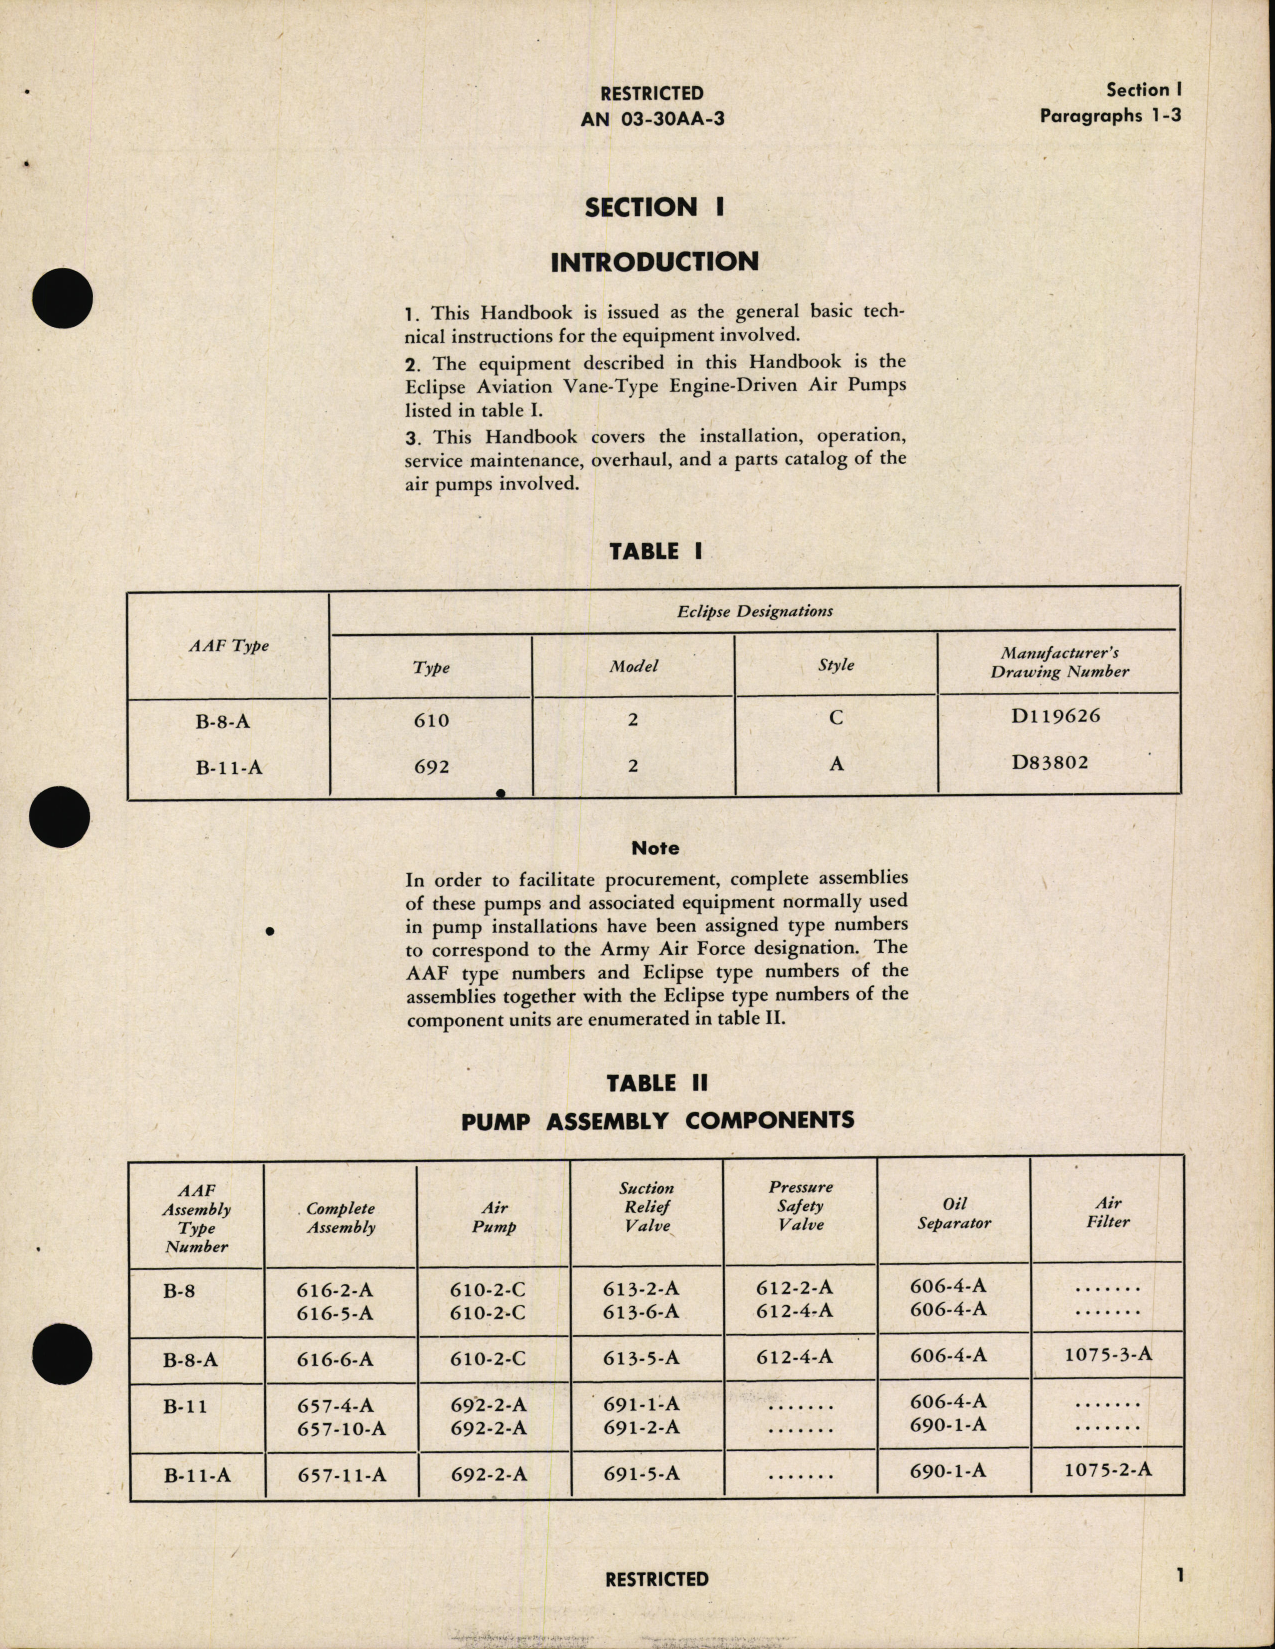 Sample page 5 from AirCorps Library document: Handbook of Instructions with Parts Catalog for Vane type Engine Driven Air Pump